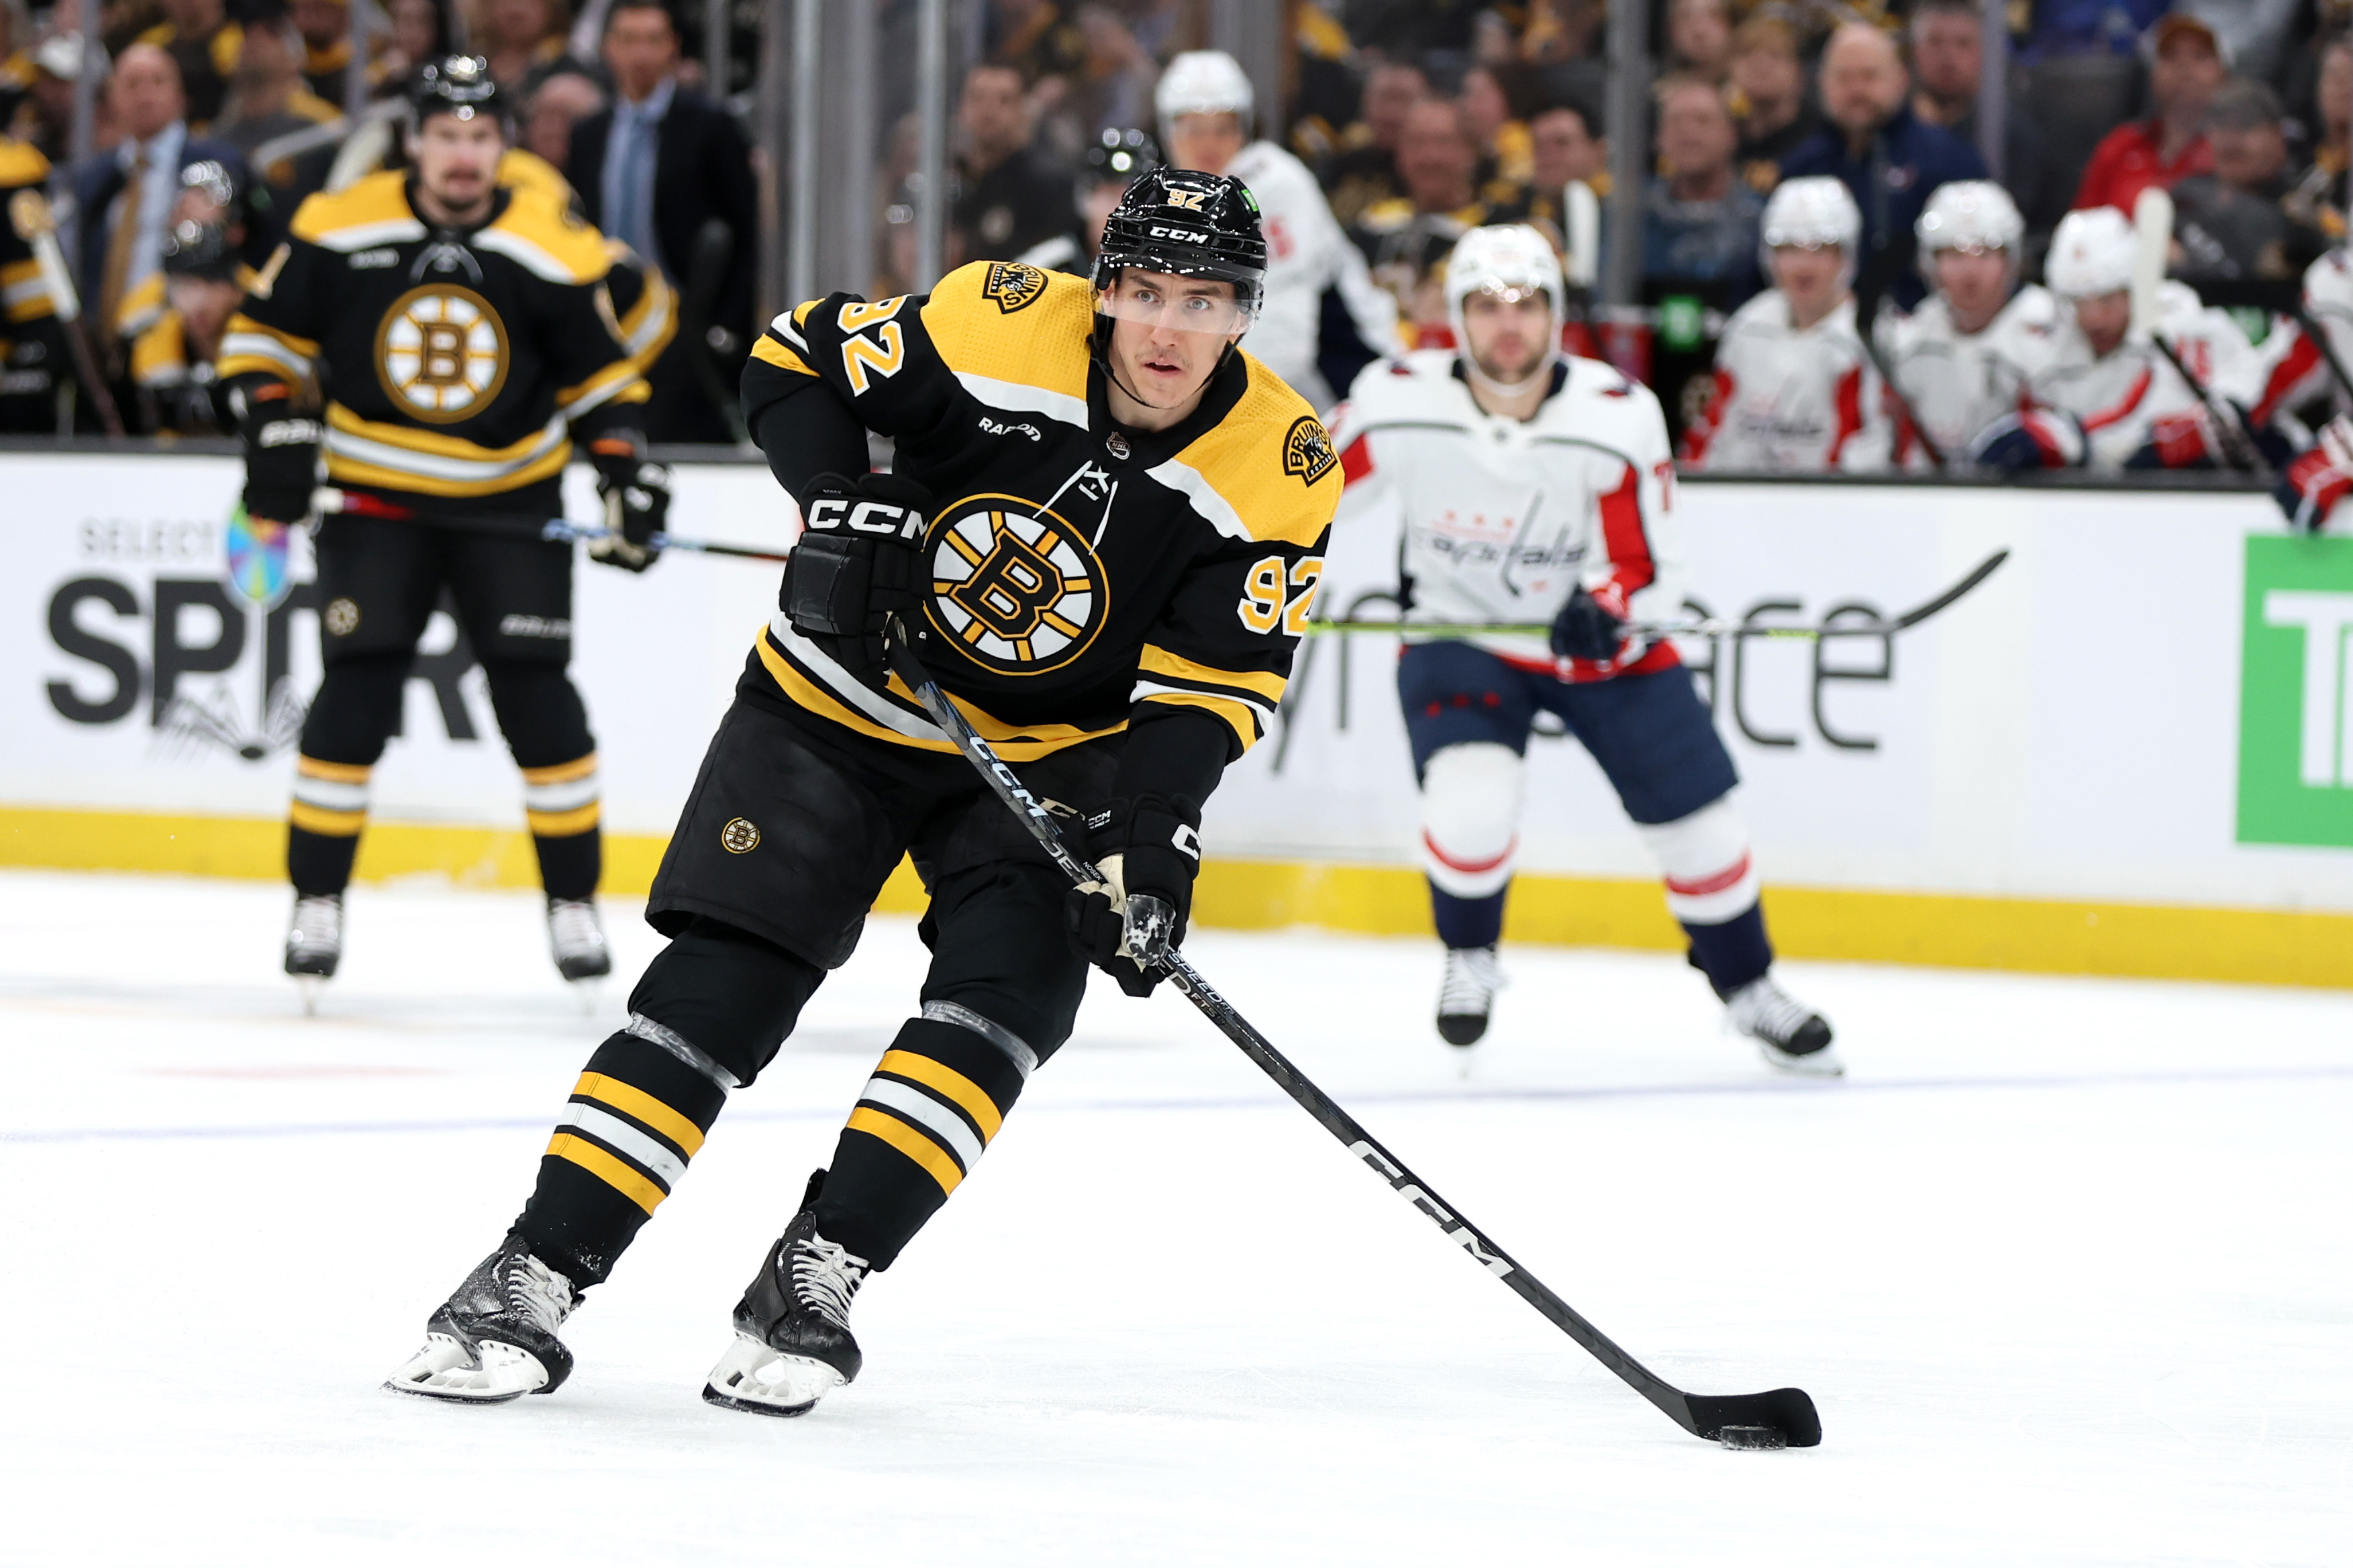 Tomas Nosek (#92) of the Boston Bruins skates in the game against the Washington Capitals at the TD Garden in Boston, Massachusetts, April 11, 2023. /CFP